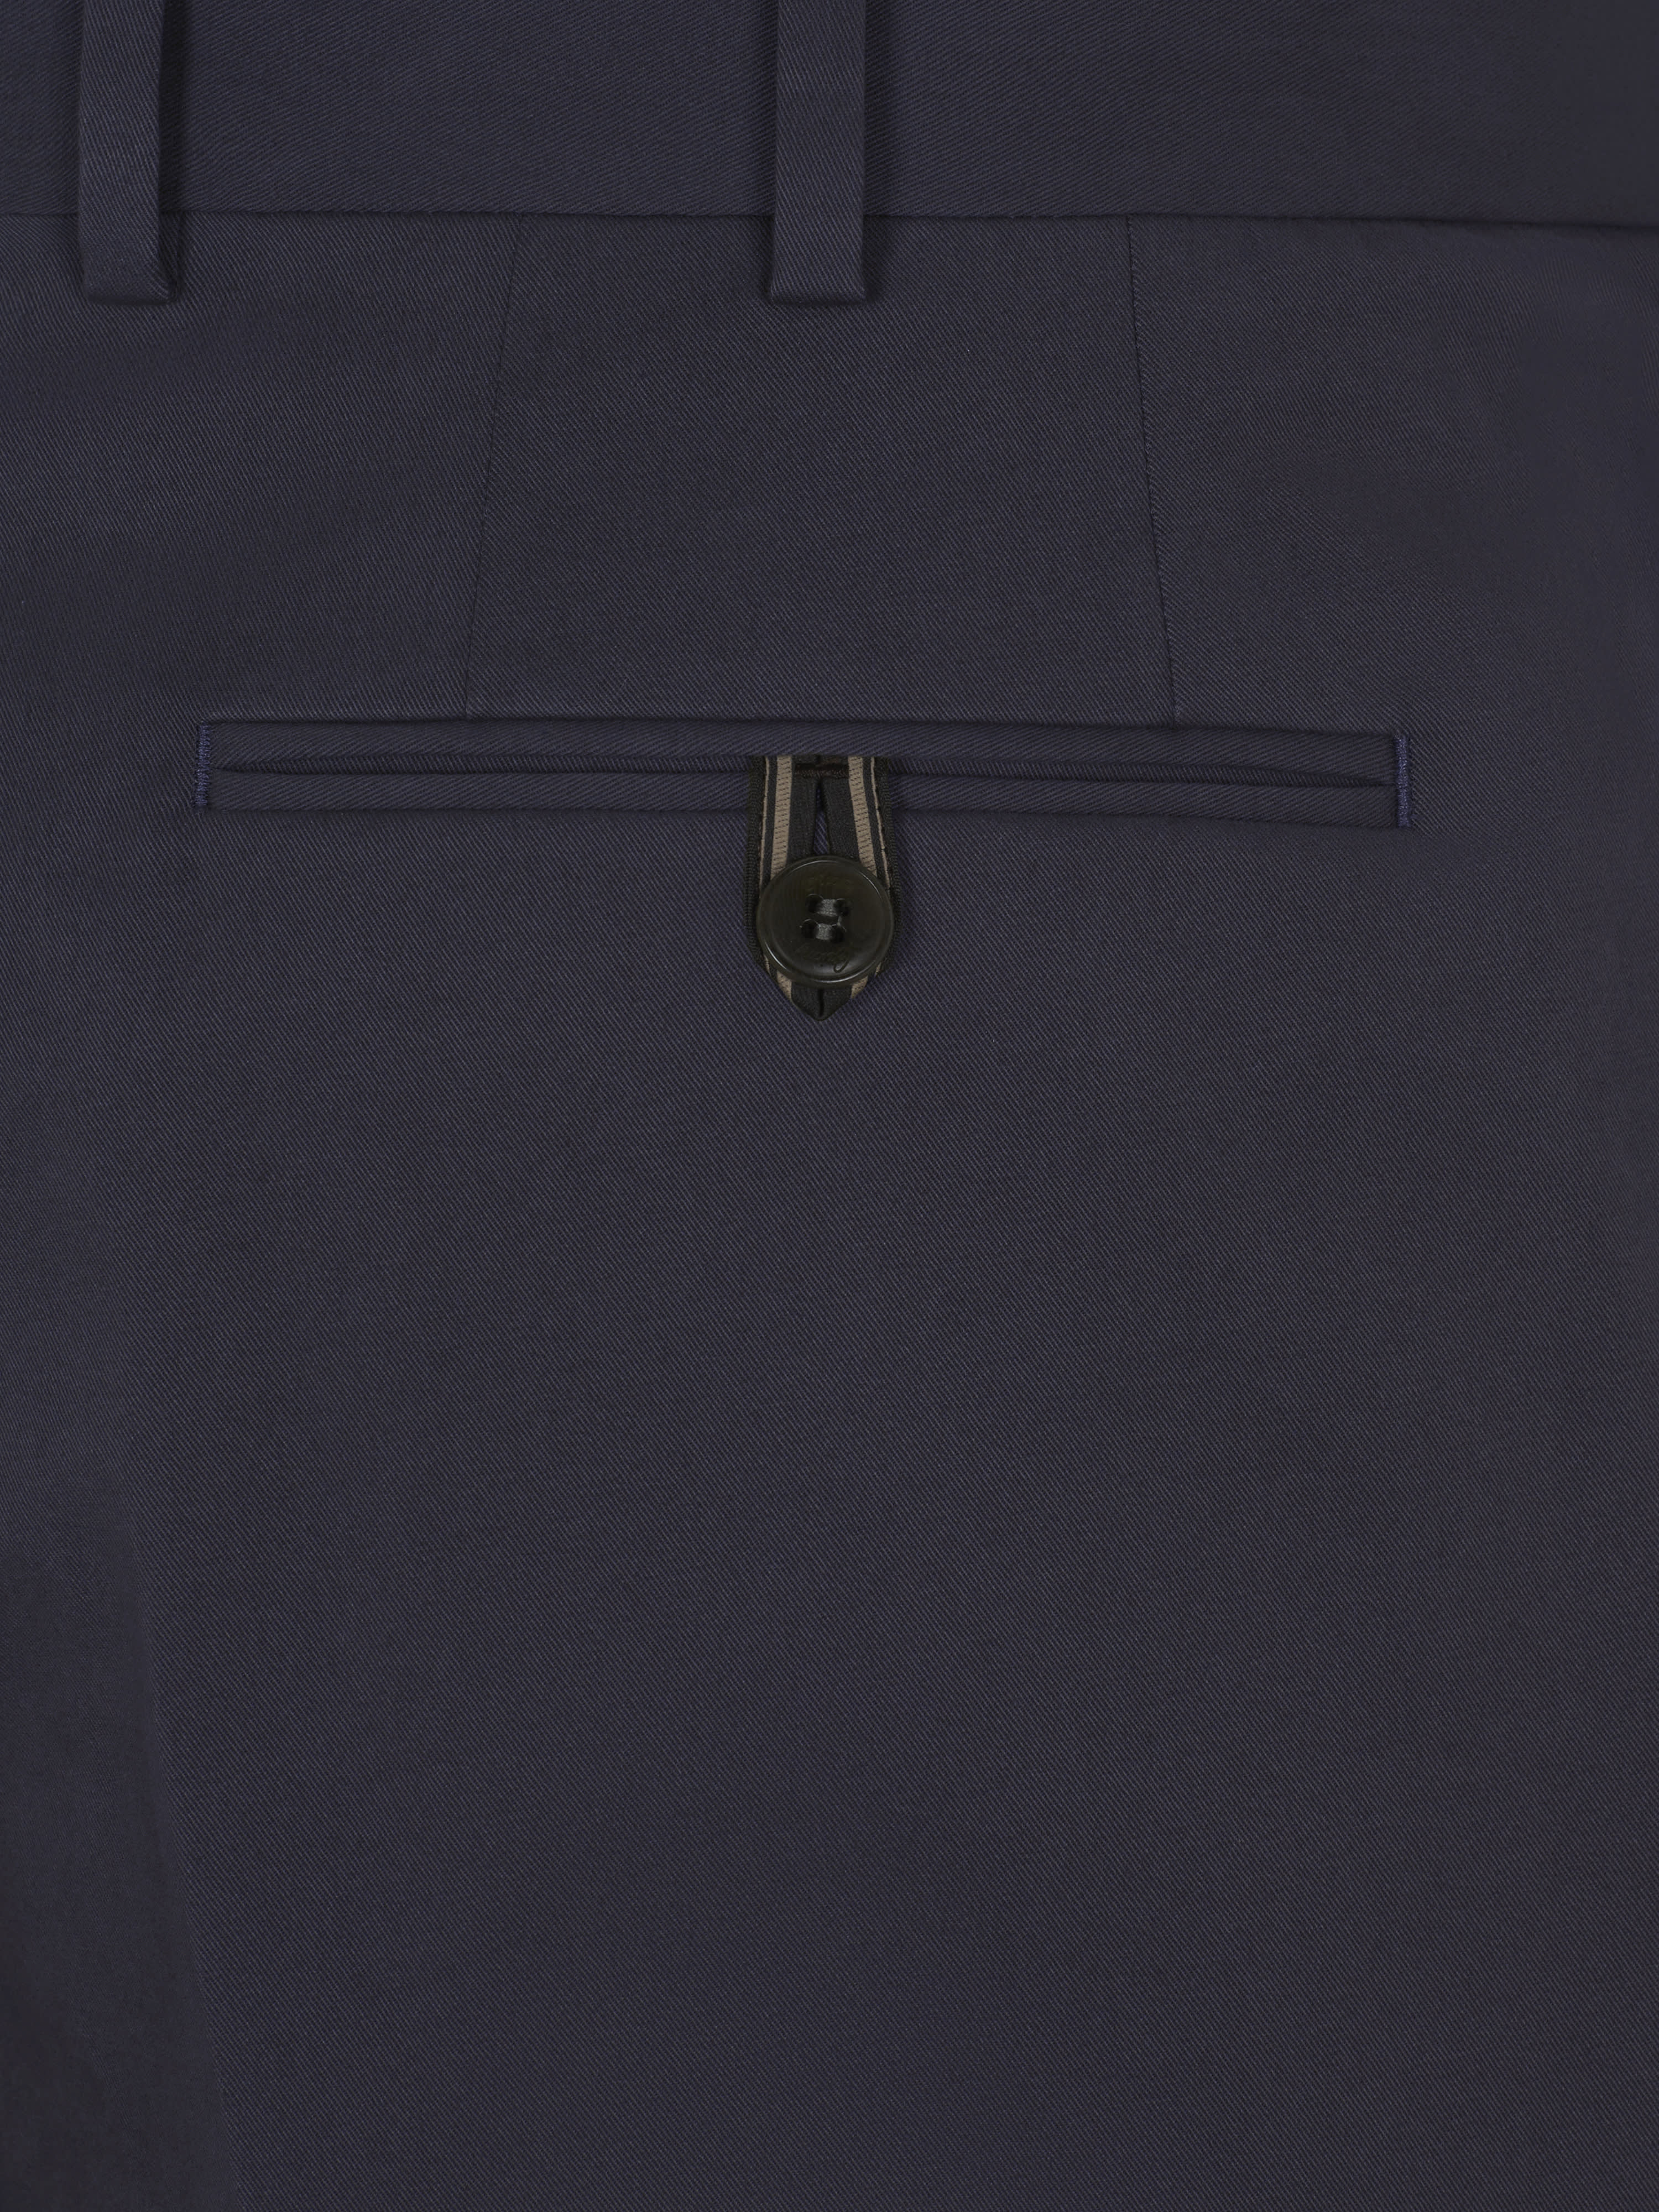 Midnight blue cotton Pienza trousers | Brioni® GB Official Store